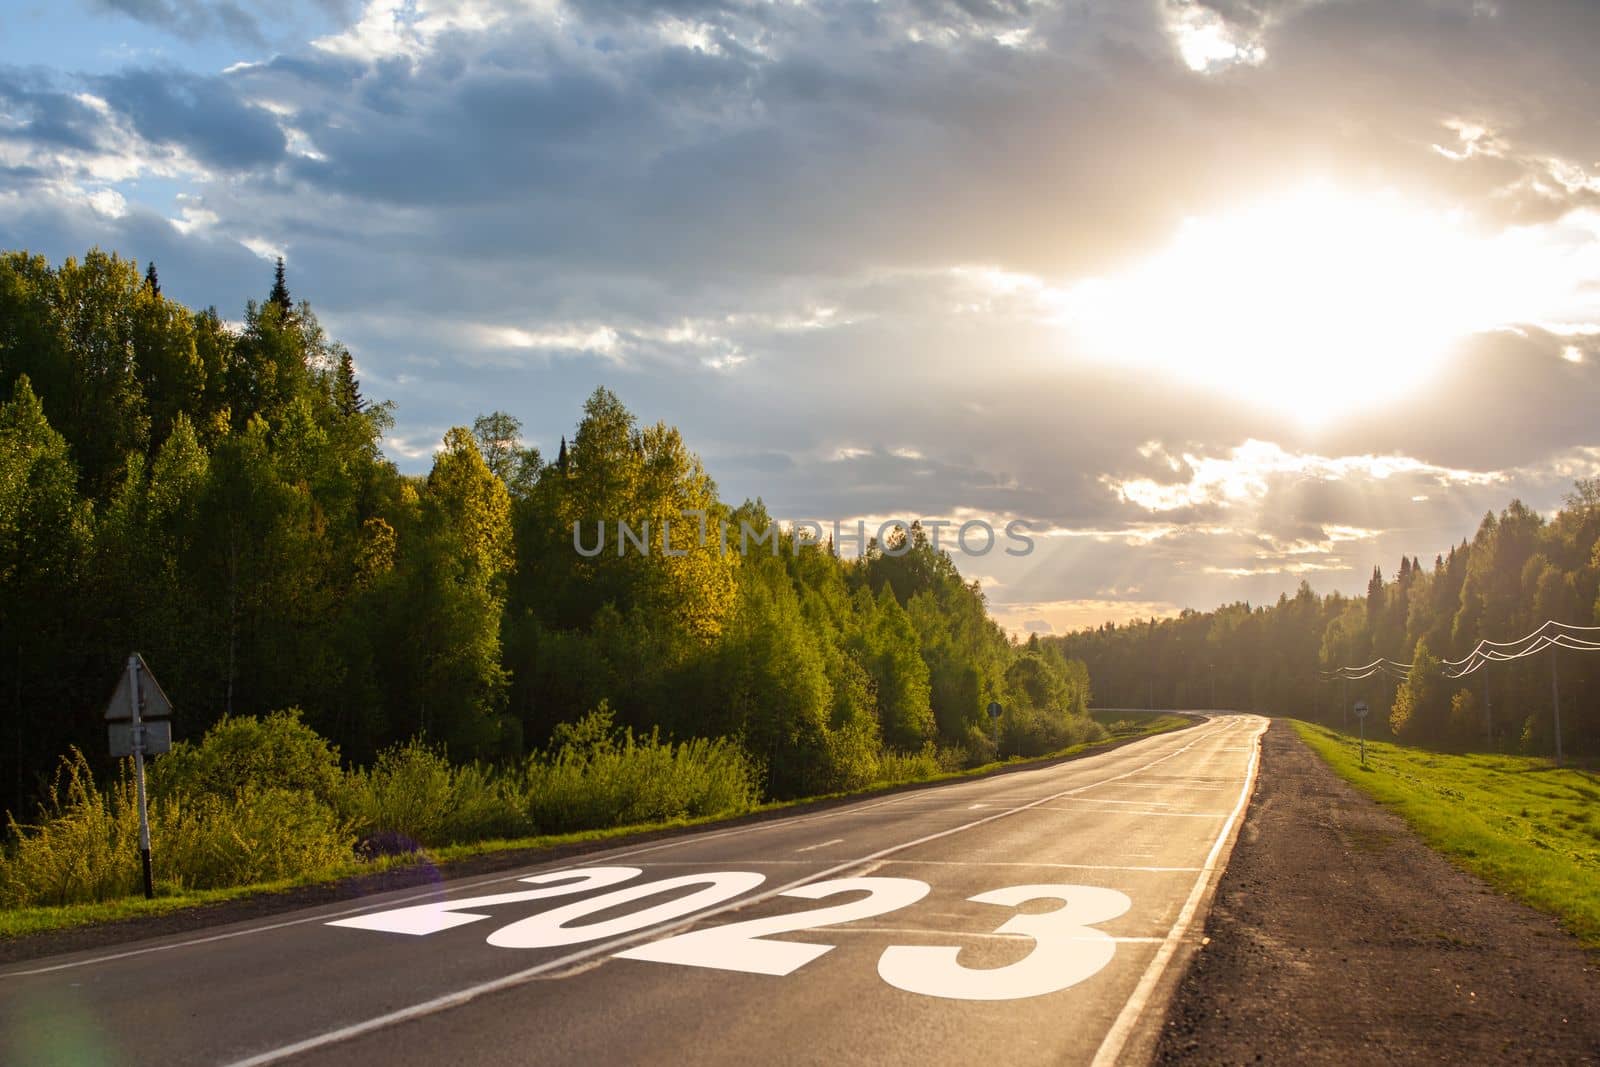 2023 written on highway road in the middle of empty asphalt road by AnatoliiFoto